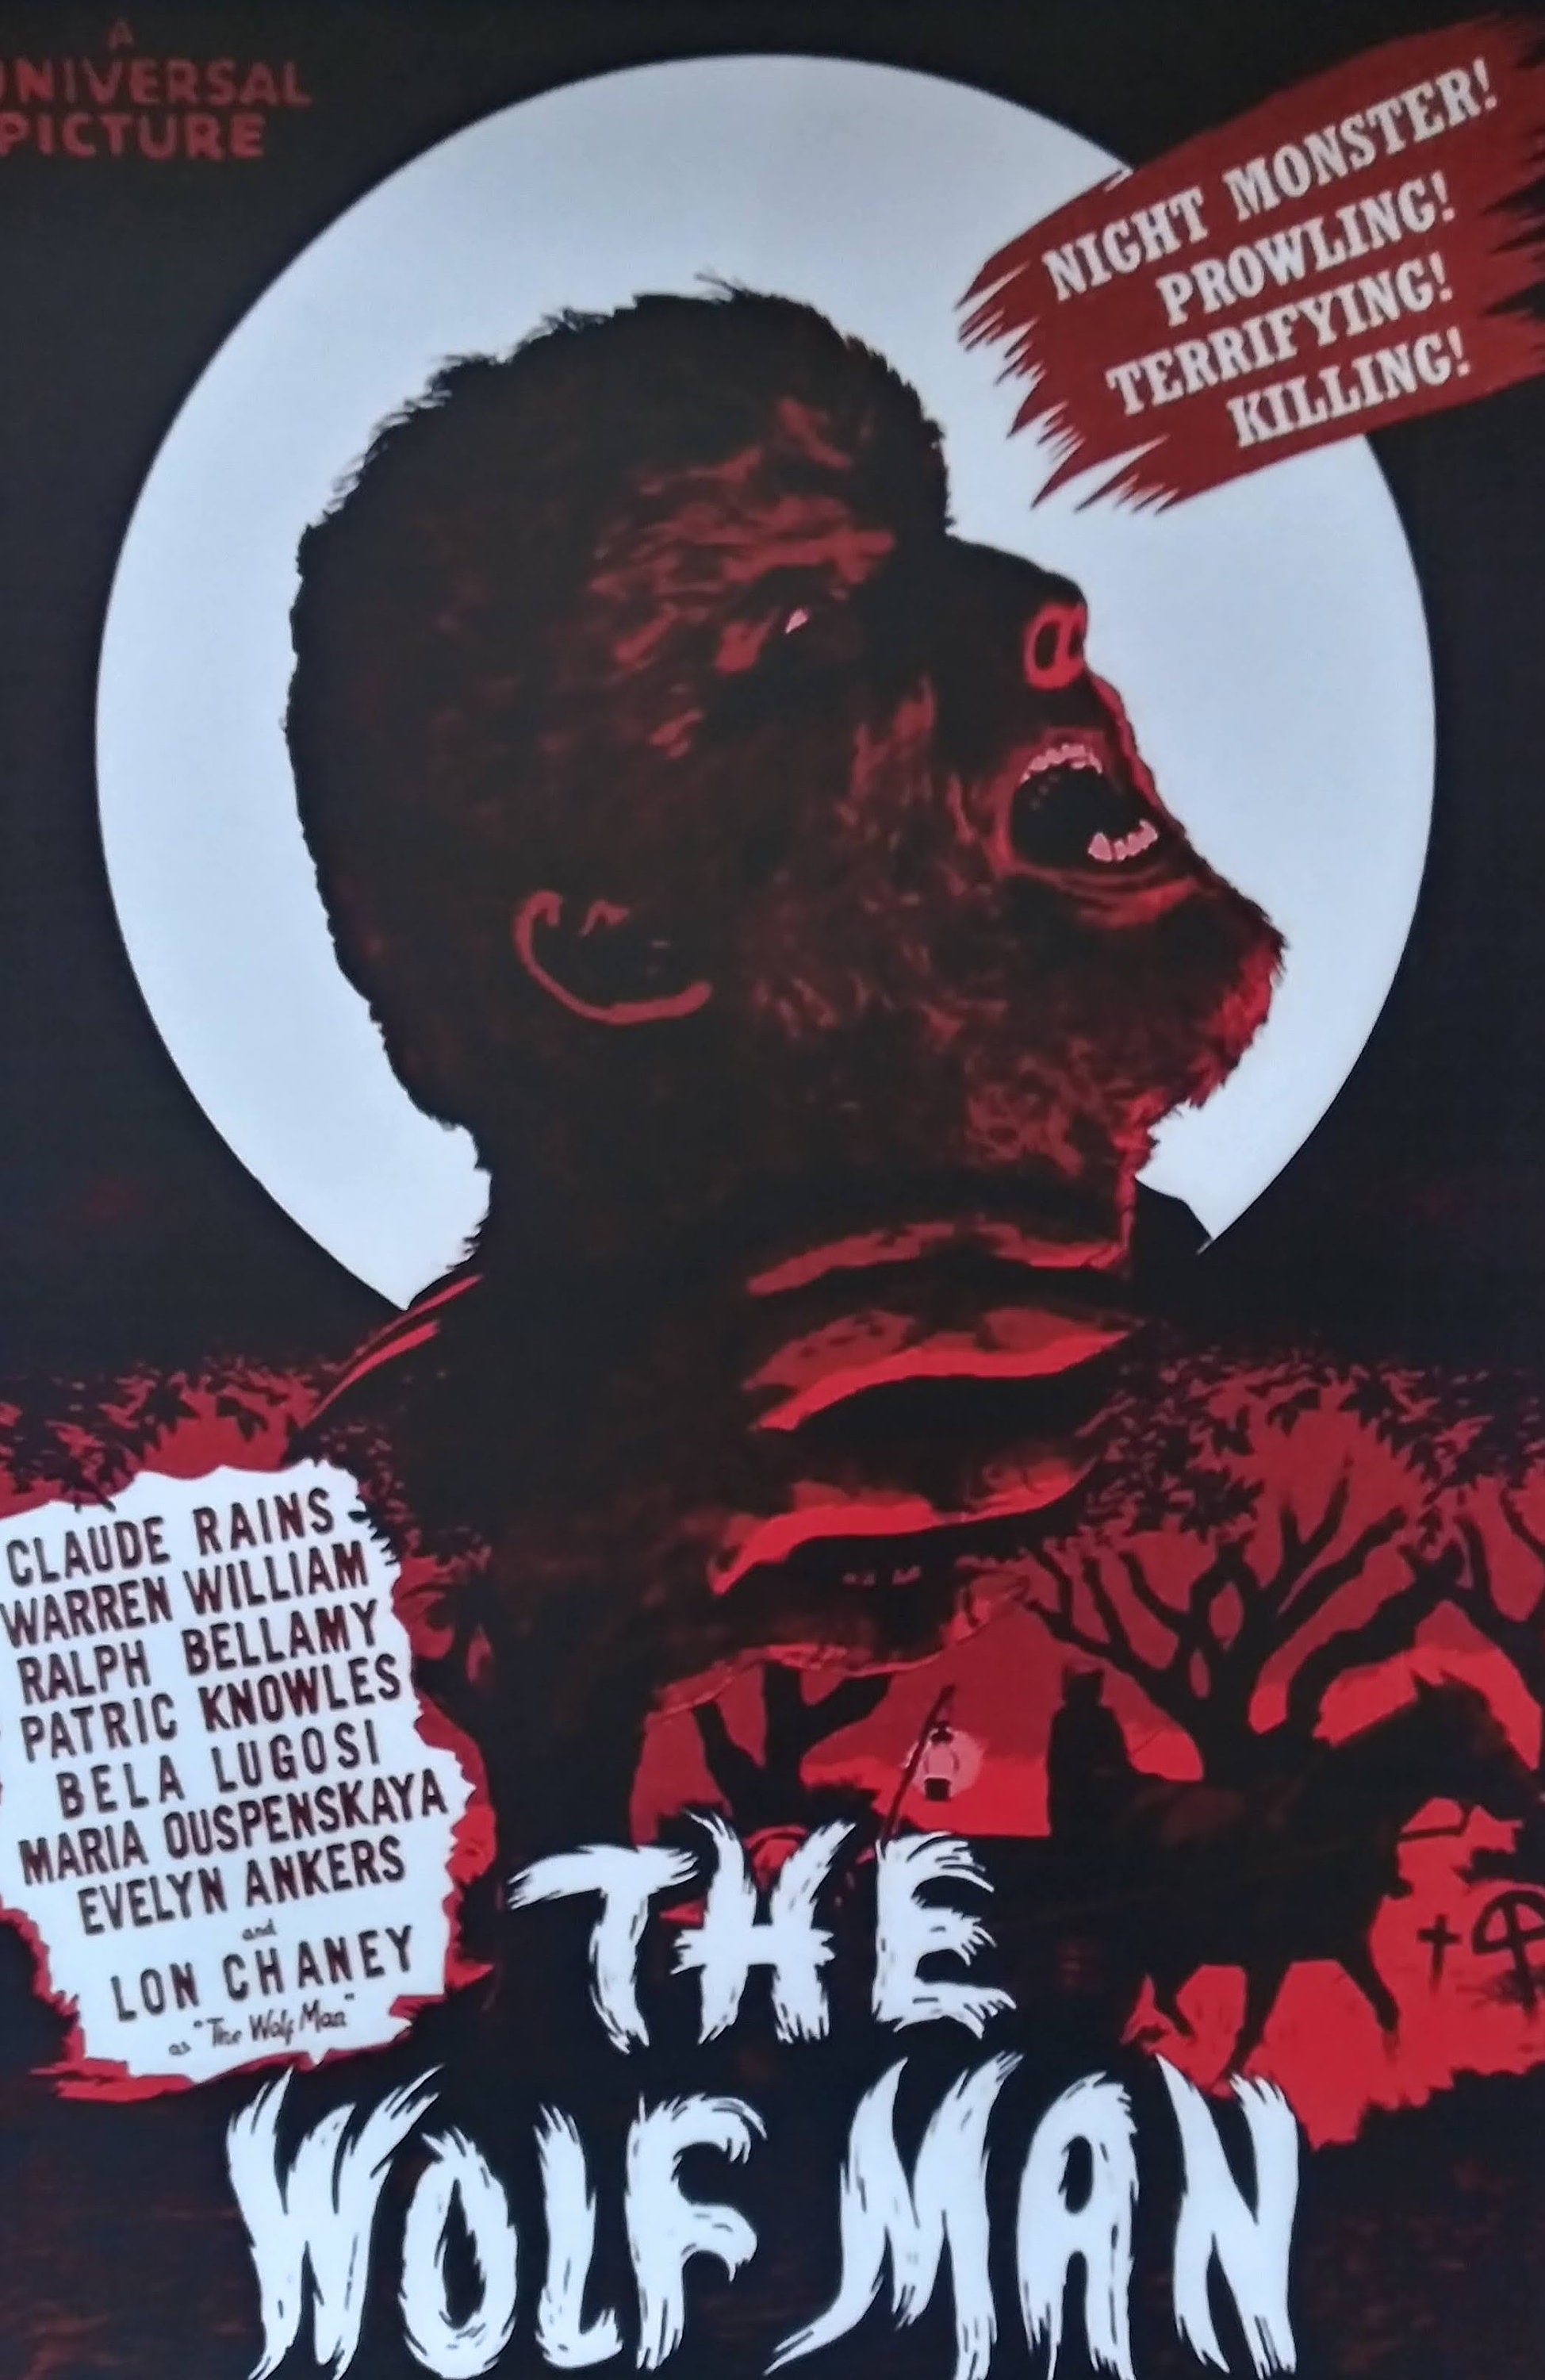 THE WOLF MAN (3) movie poster